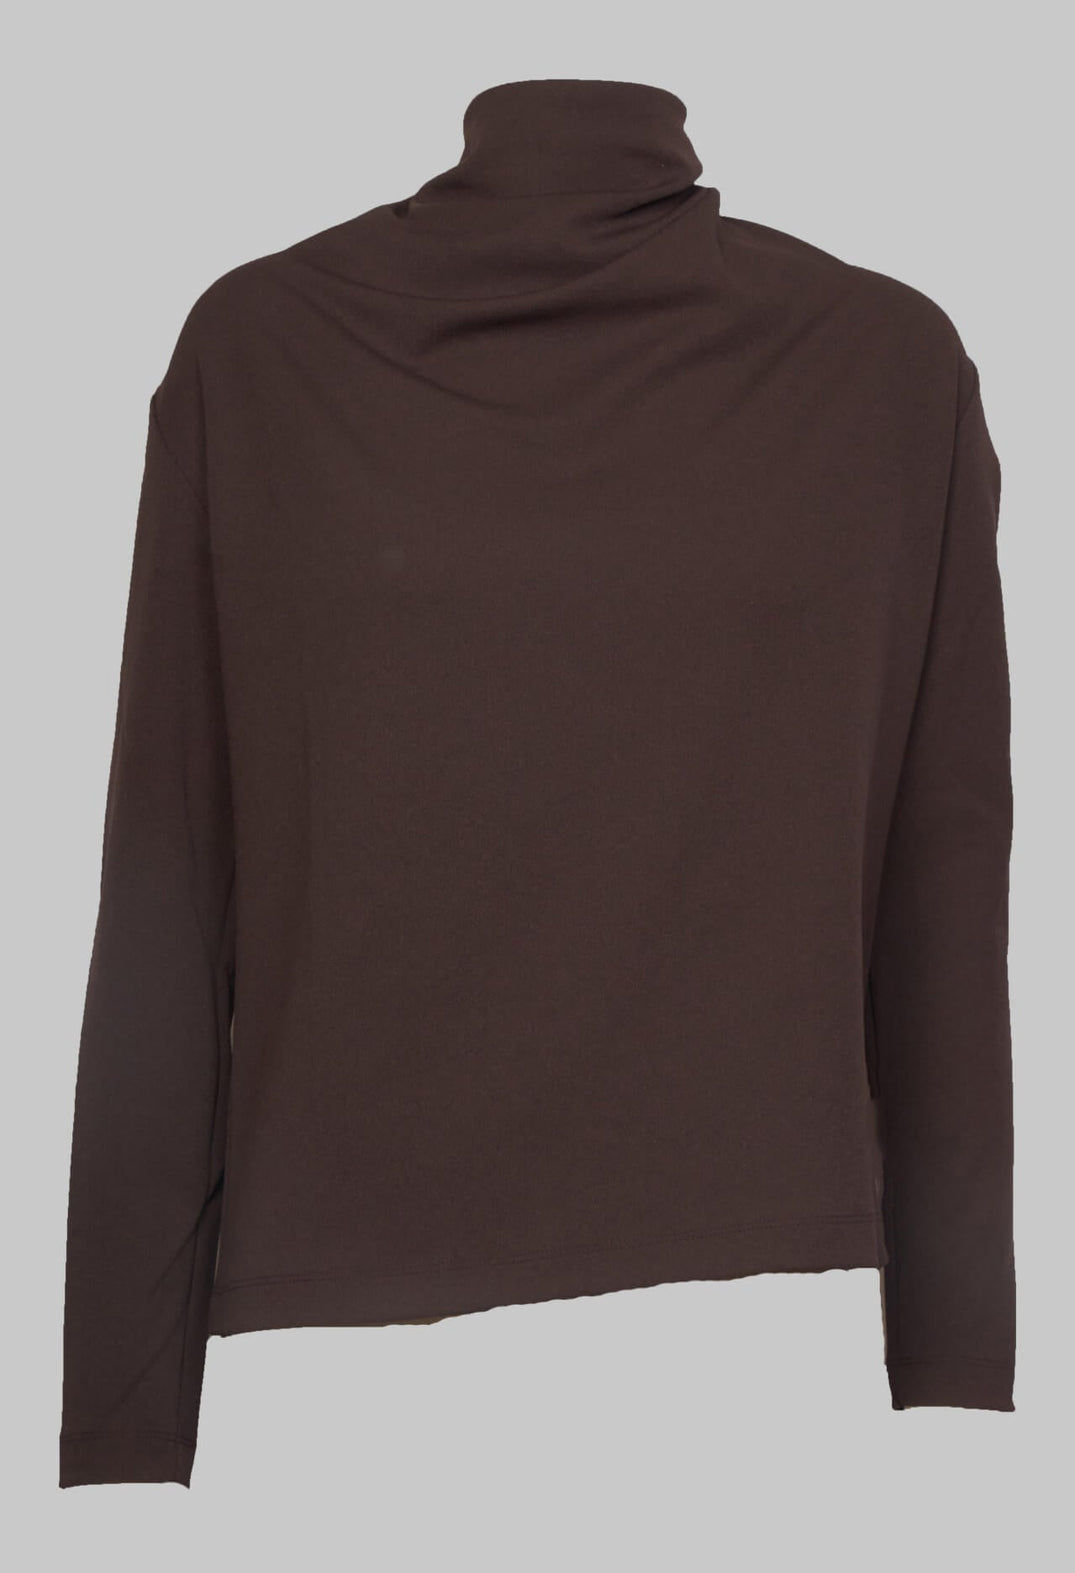 Draped Neck Blouse with Long Sleeves in Dark Brown